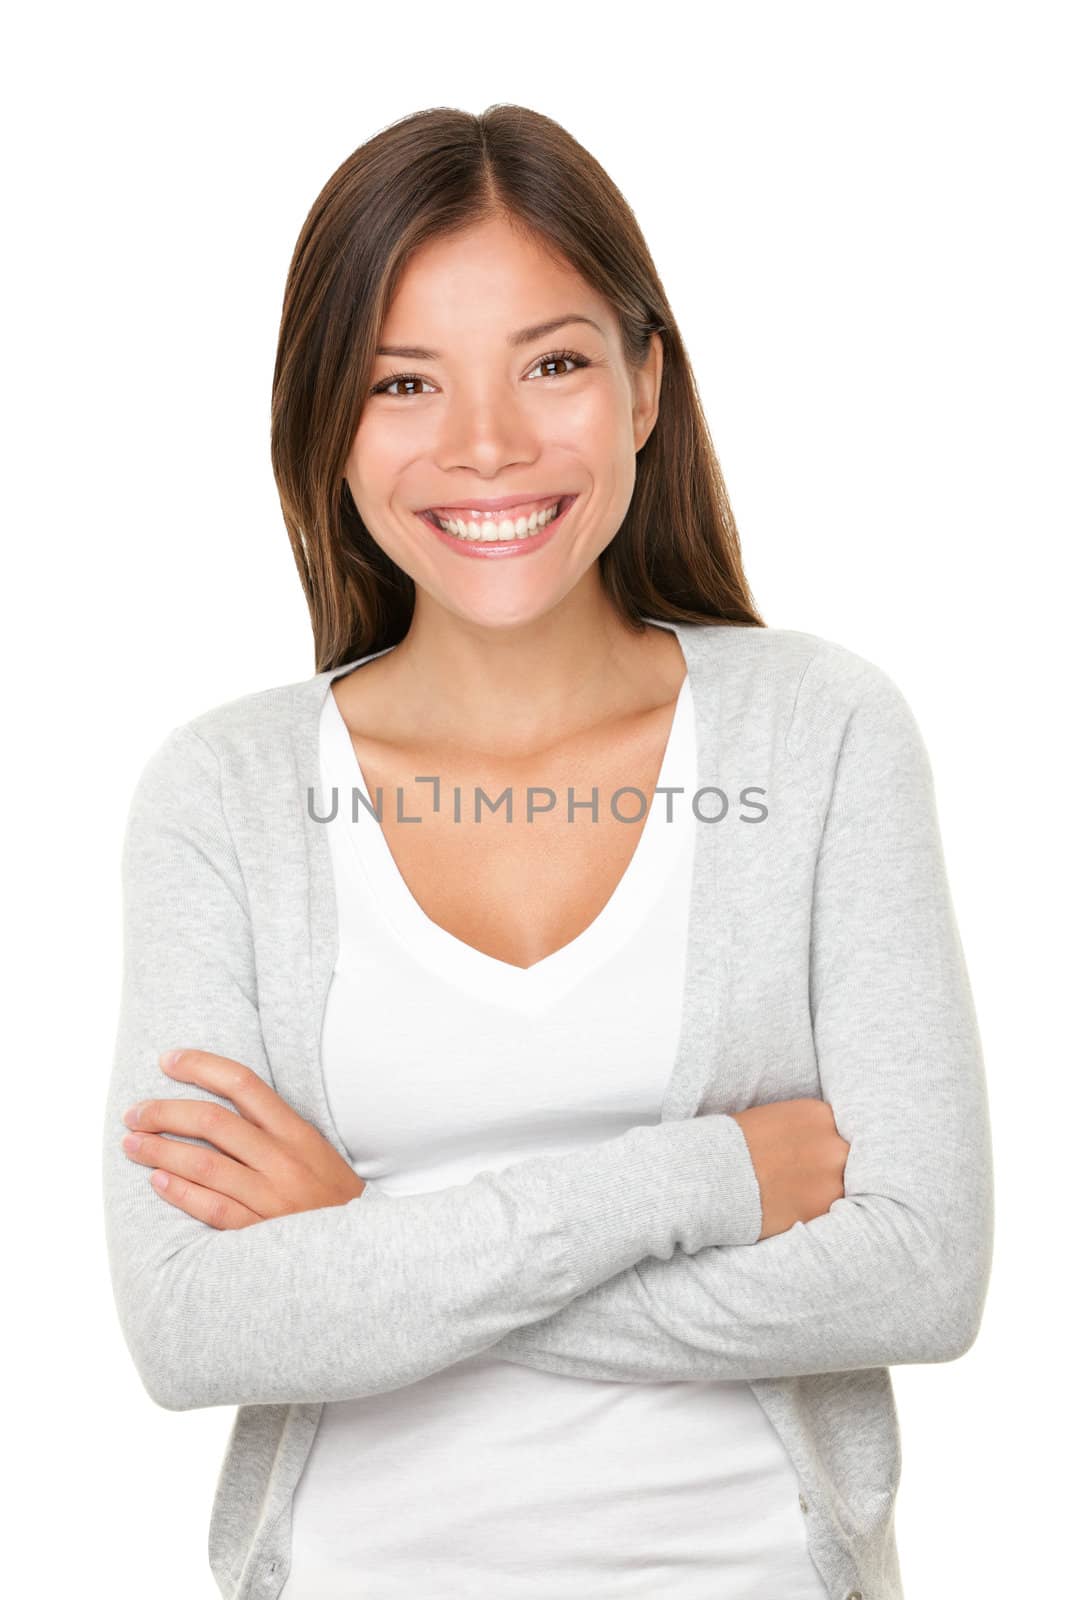 Beautiful smiling woman. Upper body portrait of a beautiful vivacious young woman of mixed Asian Caucasian descent with a beaming smile isolated on white